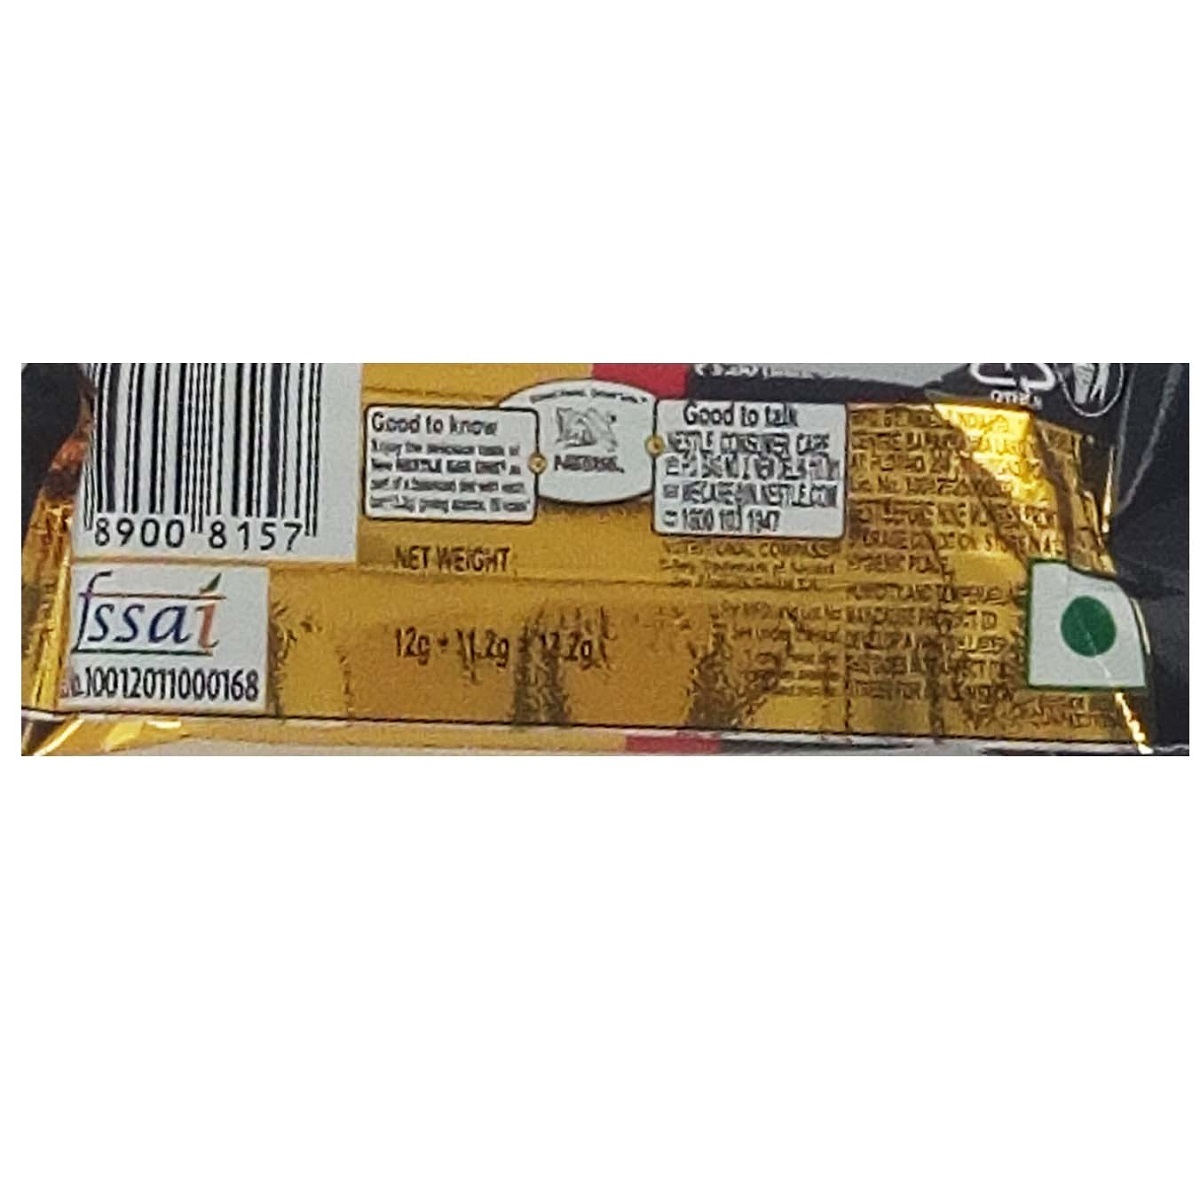 Nestle Chocolate Bar One Count line 12g